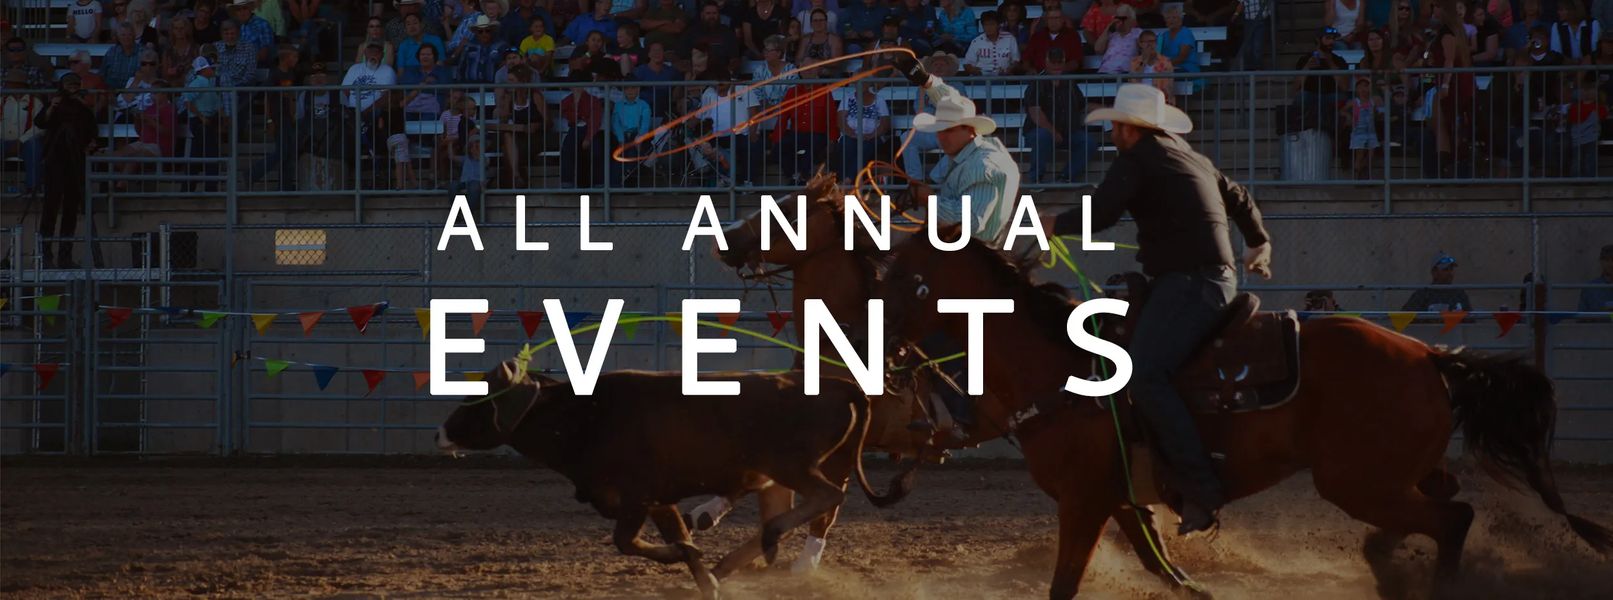 Annual Events in Lewistown and Central Montana